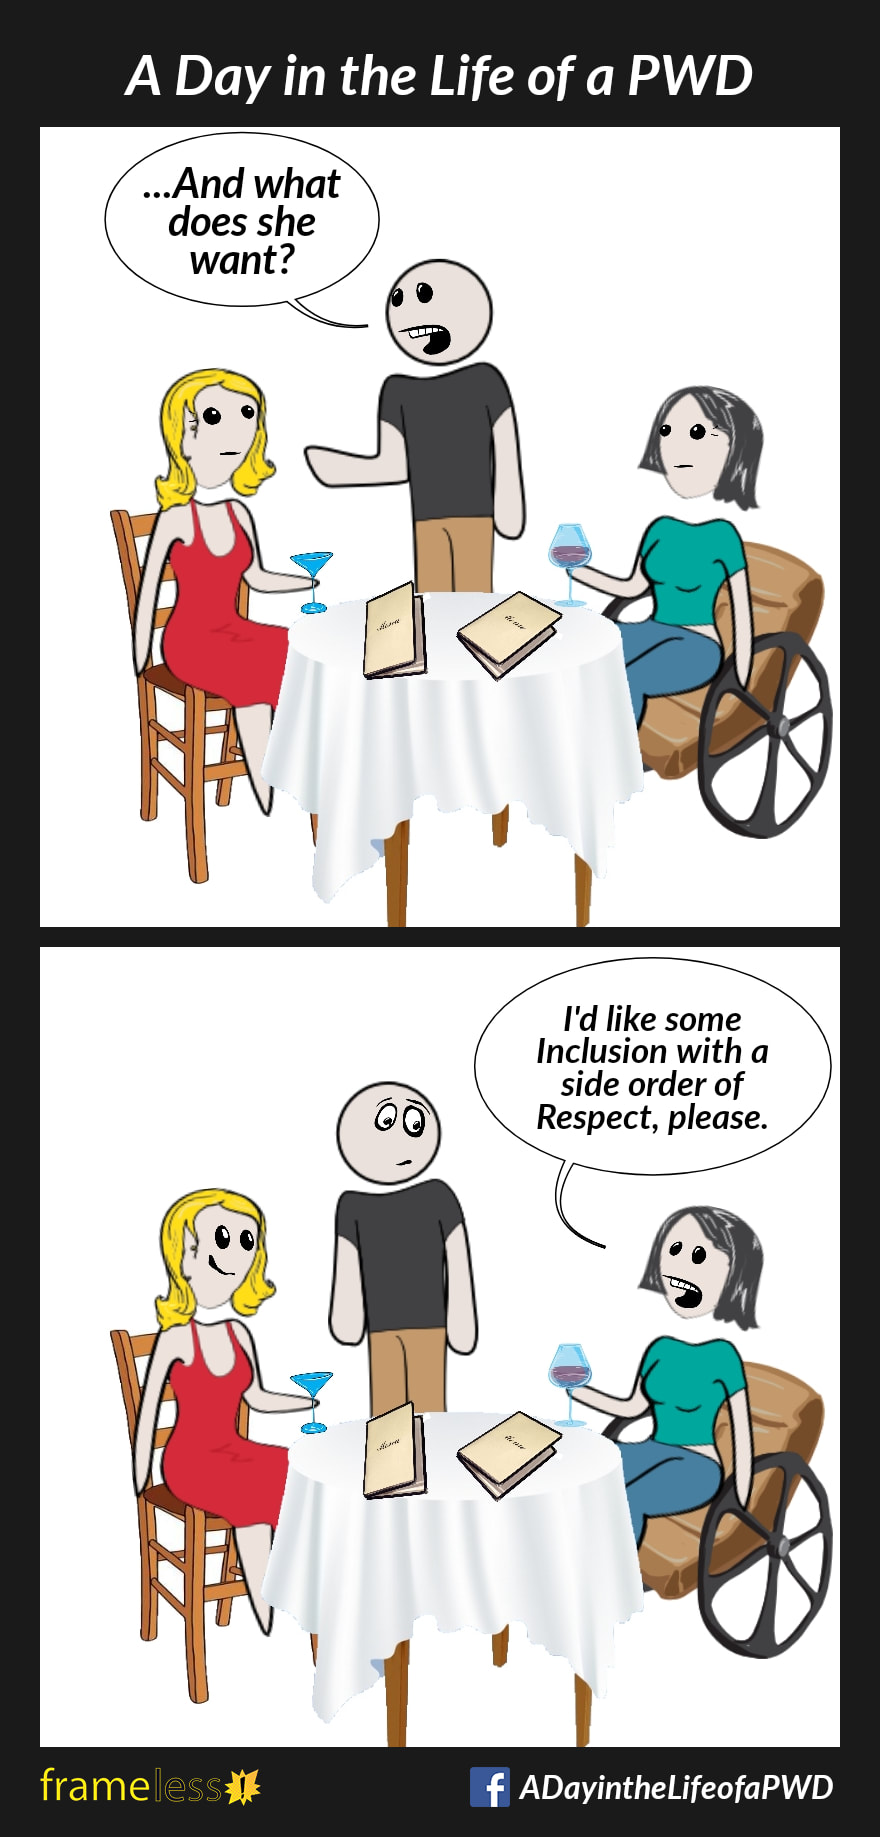 COMIC STRIP 
A Day in the Life of a PWD (Person With a Disability) 

Frame 1:
A woman in a wheelchair and her friend are seated at a table in a restaurant. The waiter is taking their order.
WAITER (to friend): ...And what does she want?

Frame 2:
WOMAN: I'd like some Inclusion with a side order of Respect, please.